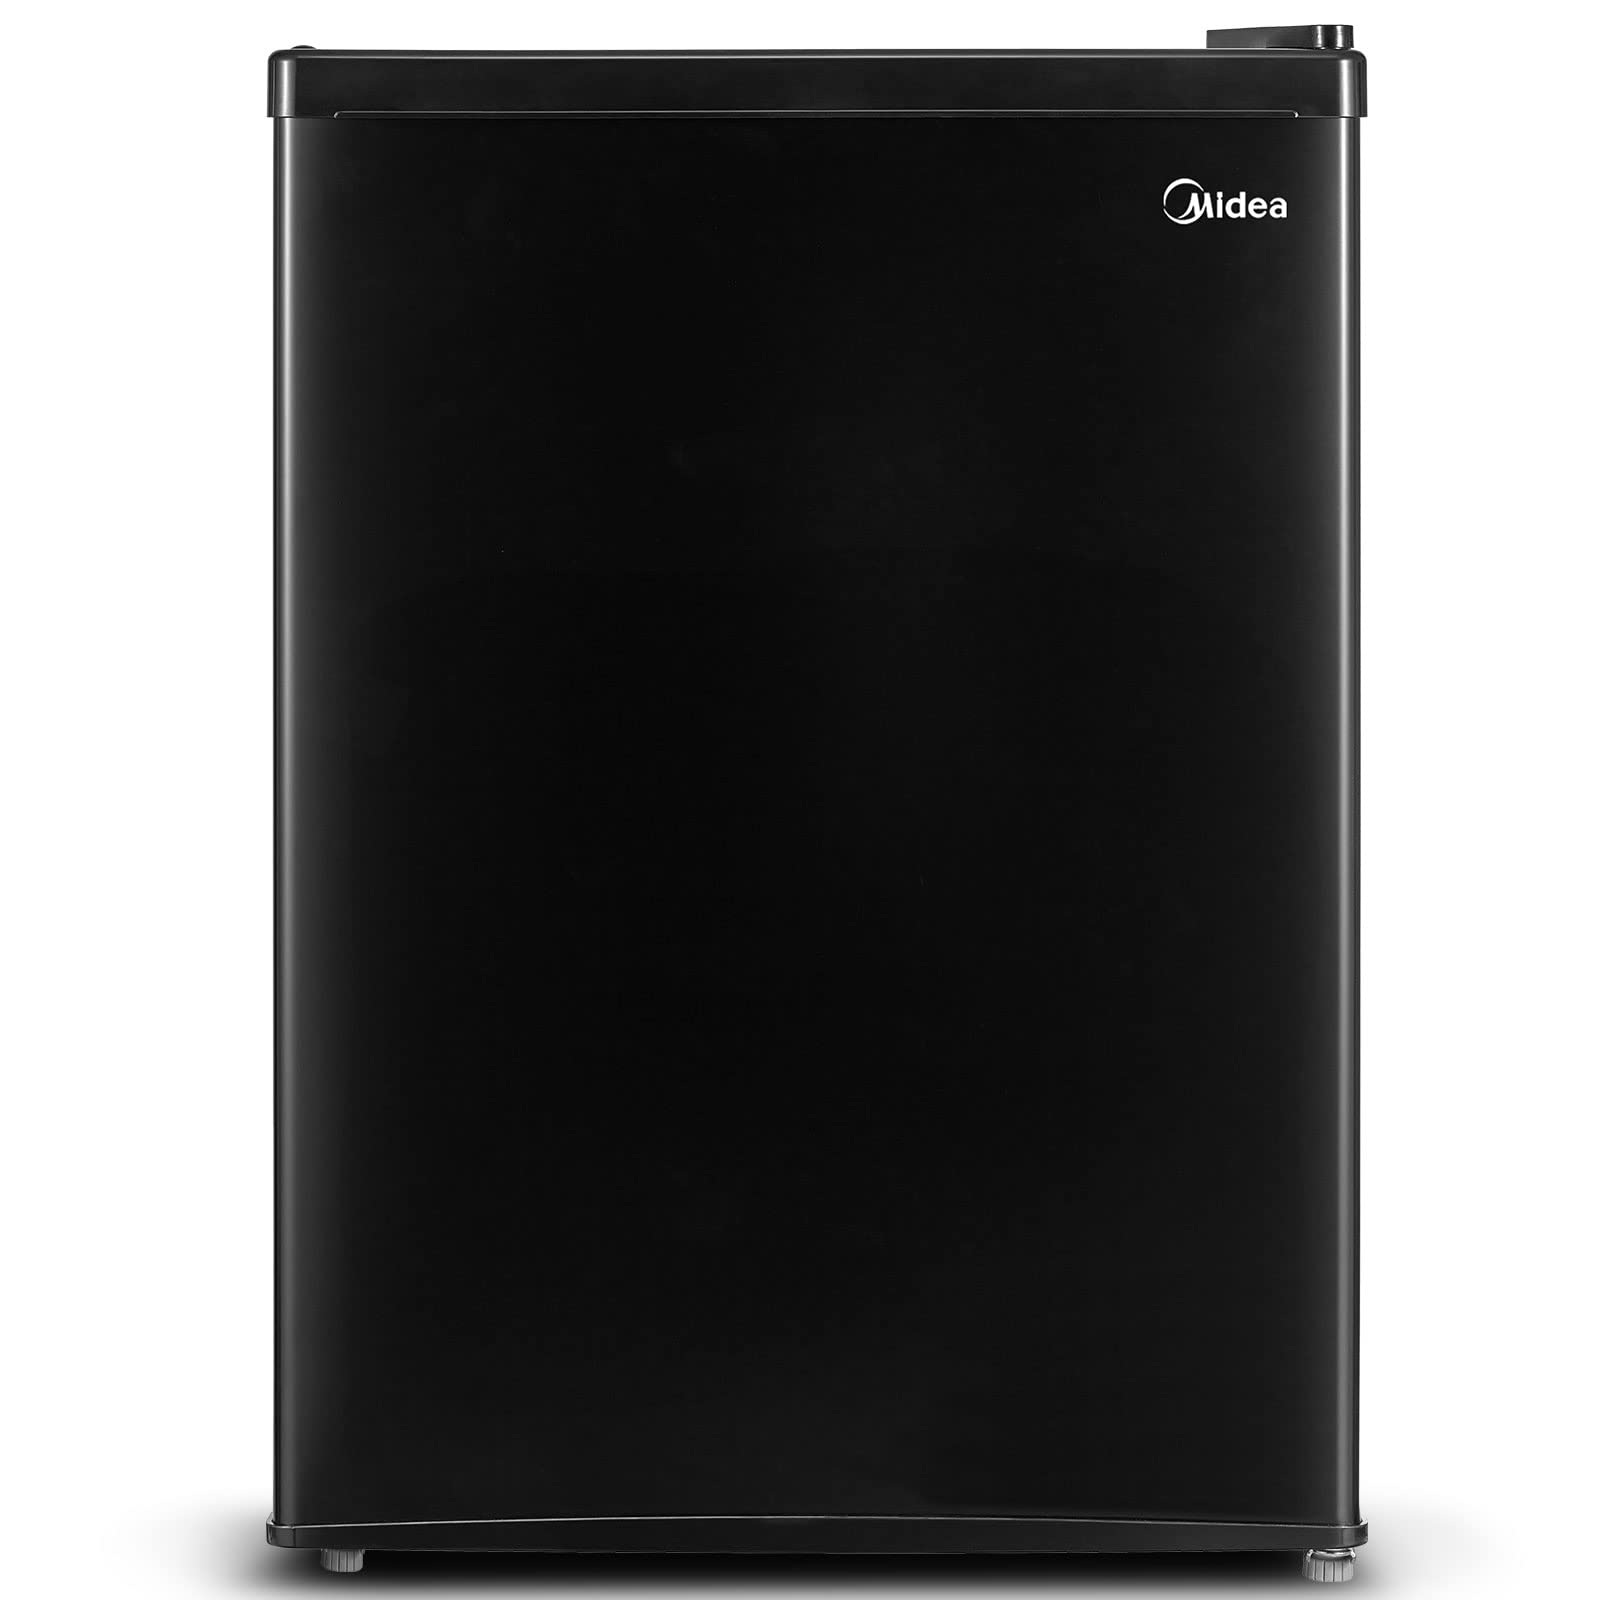 Midea WHS-87LB1 Refrigerator, 2.4 Cubic Feet, Black & COMFEE' EM720CPL-PMB Countertop Microwave Oven with Sound On/Off, ECO Mode and Easy One-Touch Buttons, 0.7cu.ft, 700W, Black